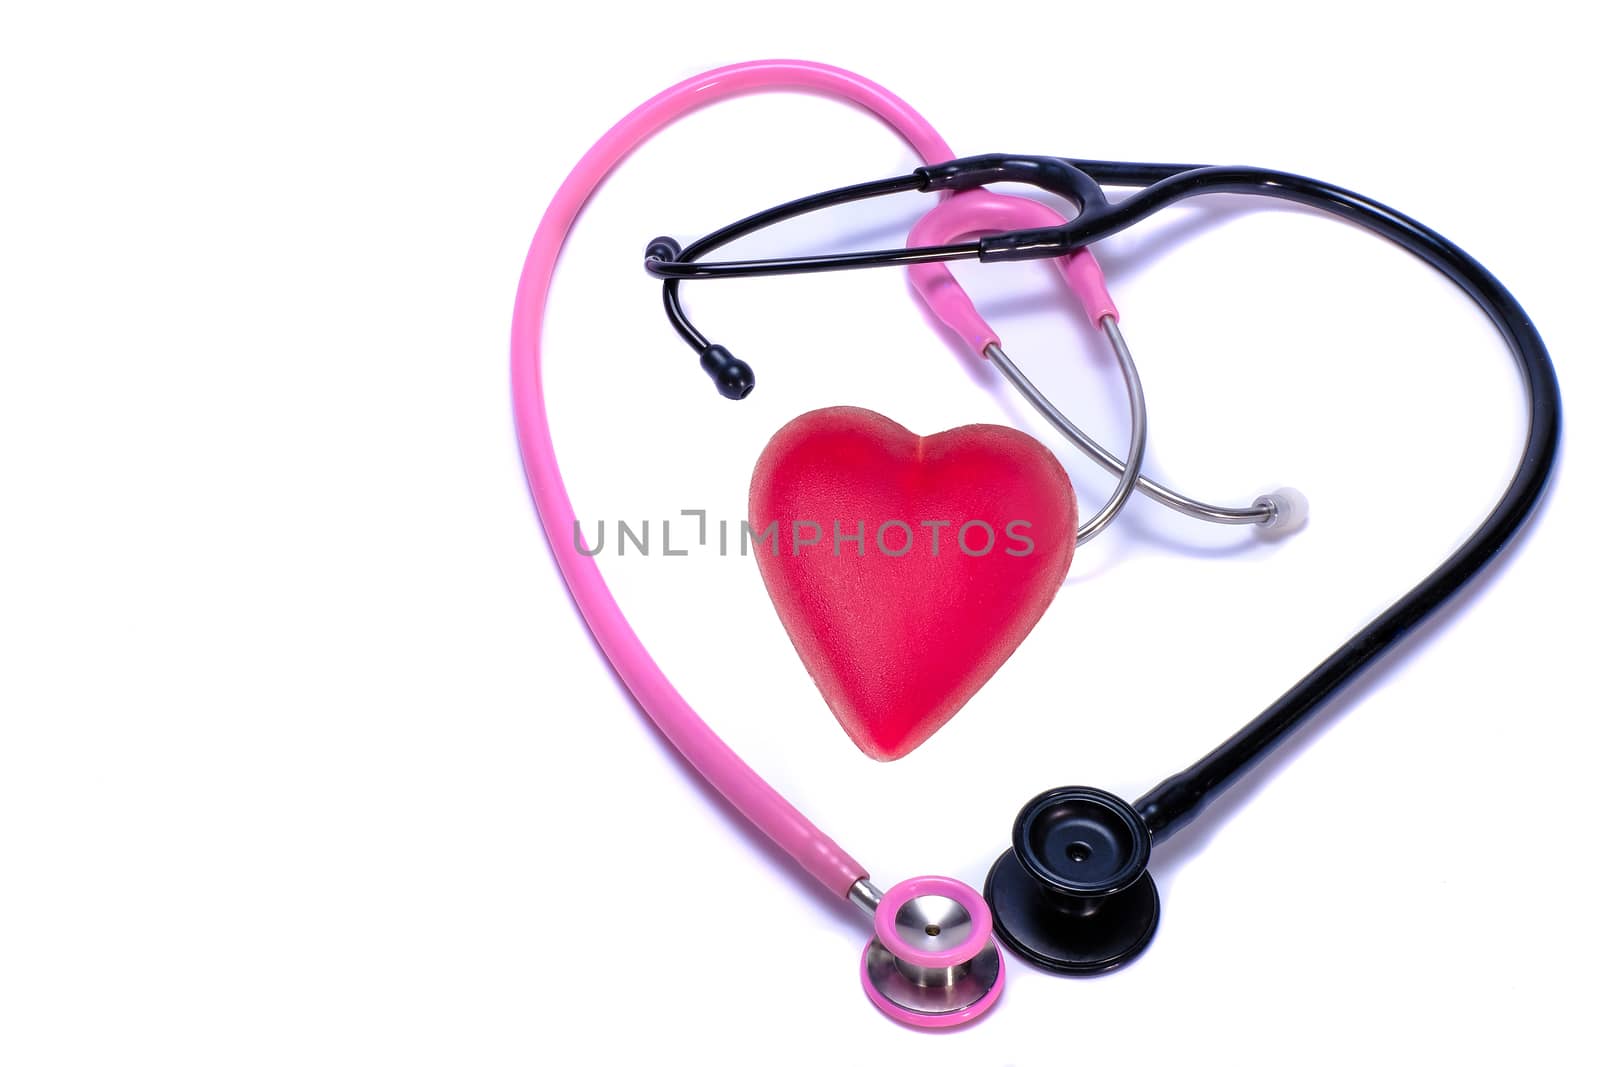 two stethoscopes and a heart, by Nawoot